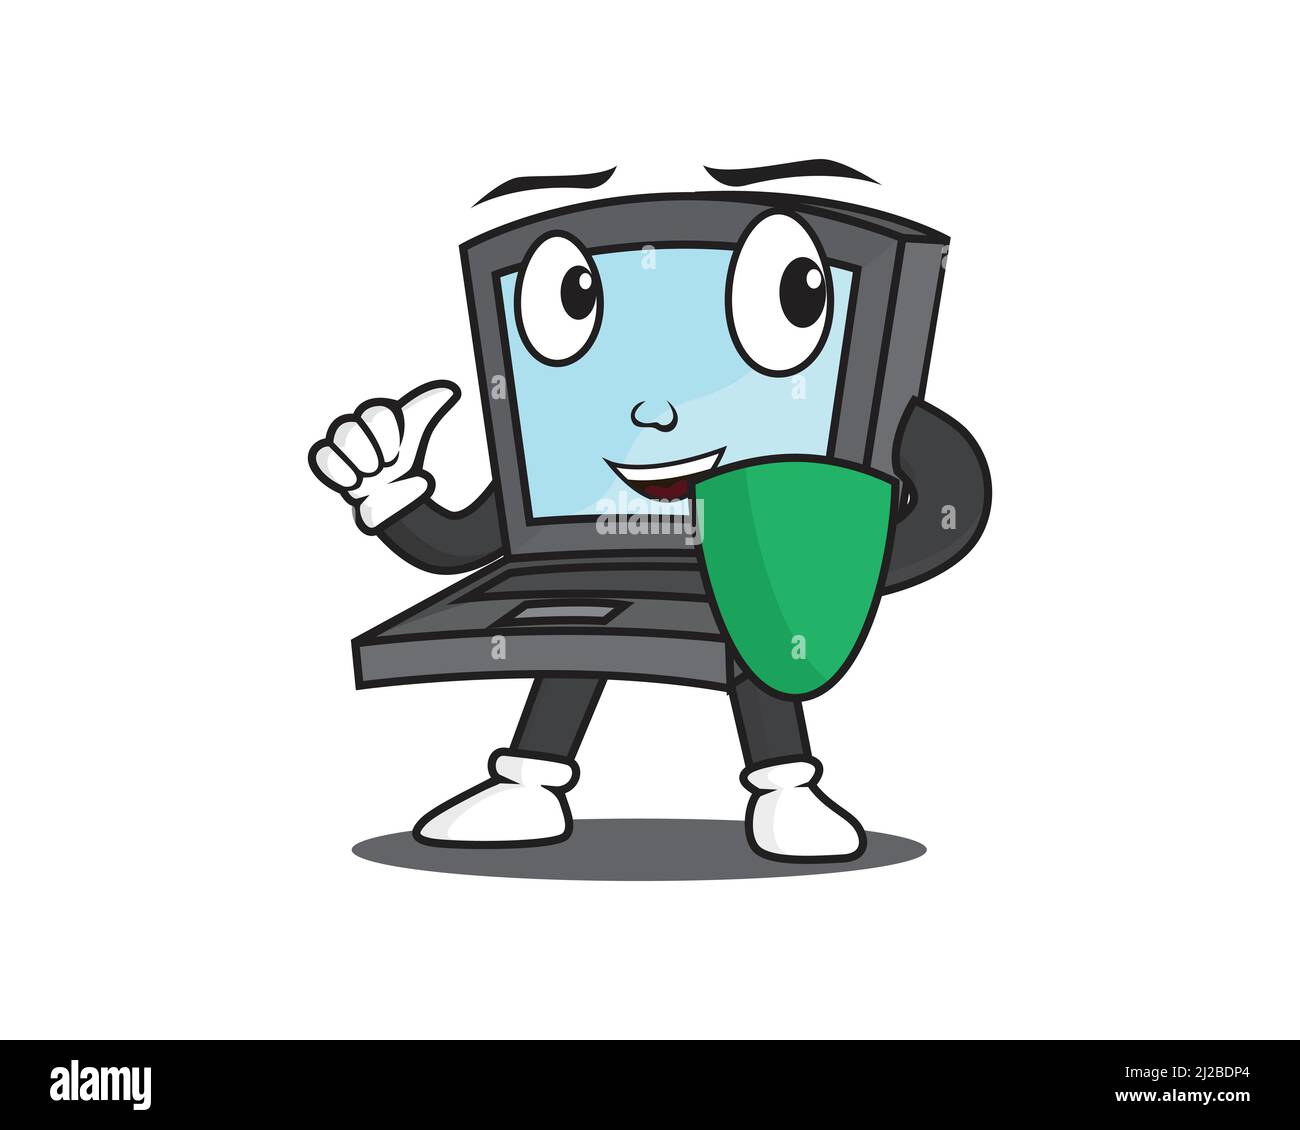 Friendly Computer Character Holding Shield as Symbolization of Protection and Security Stock Vector